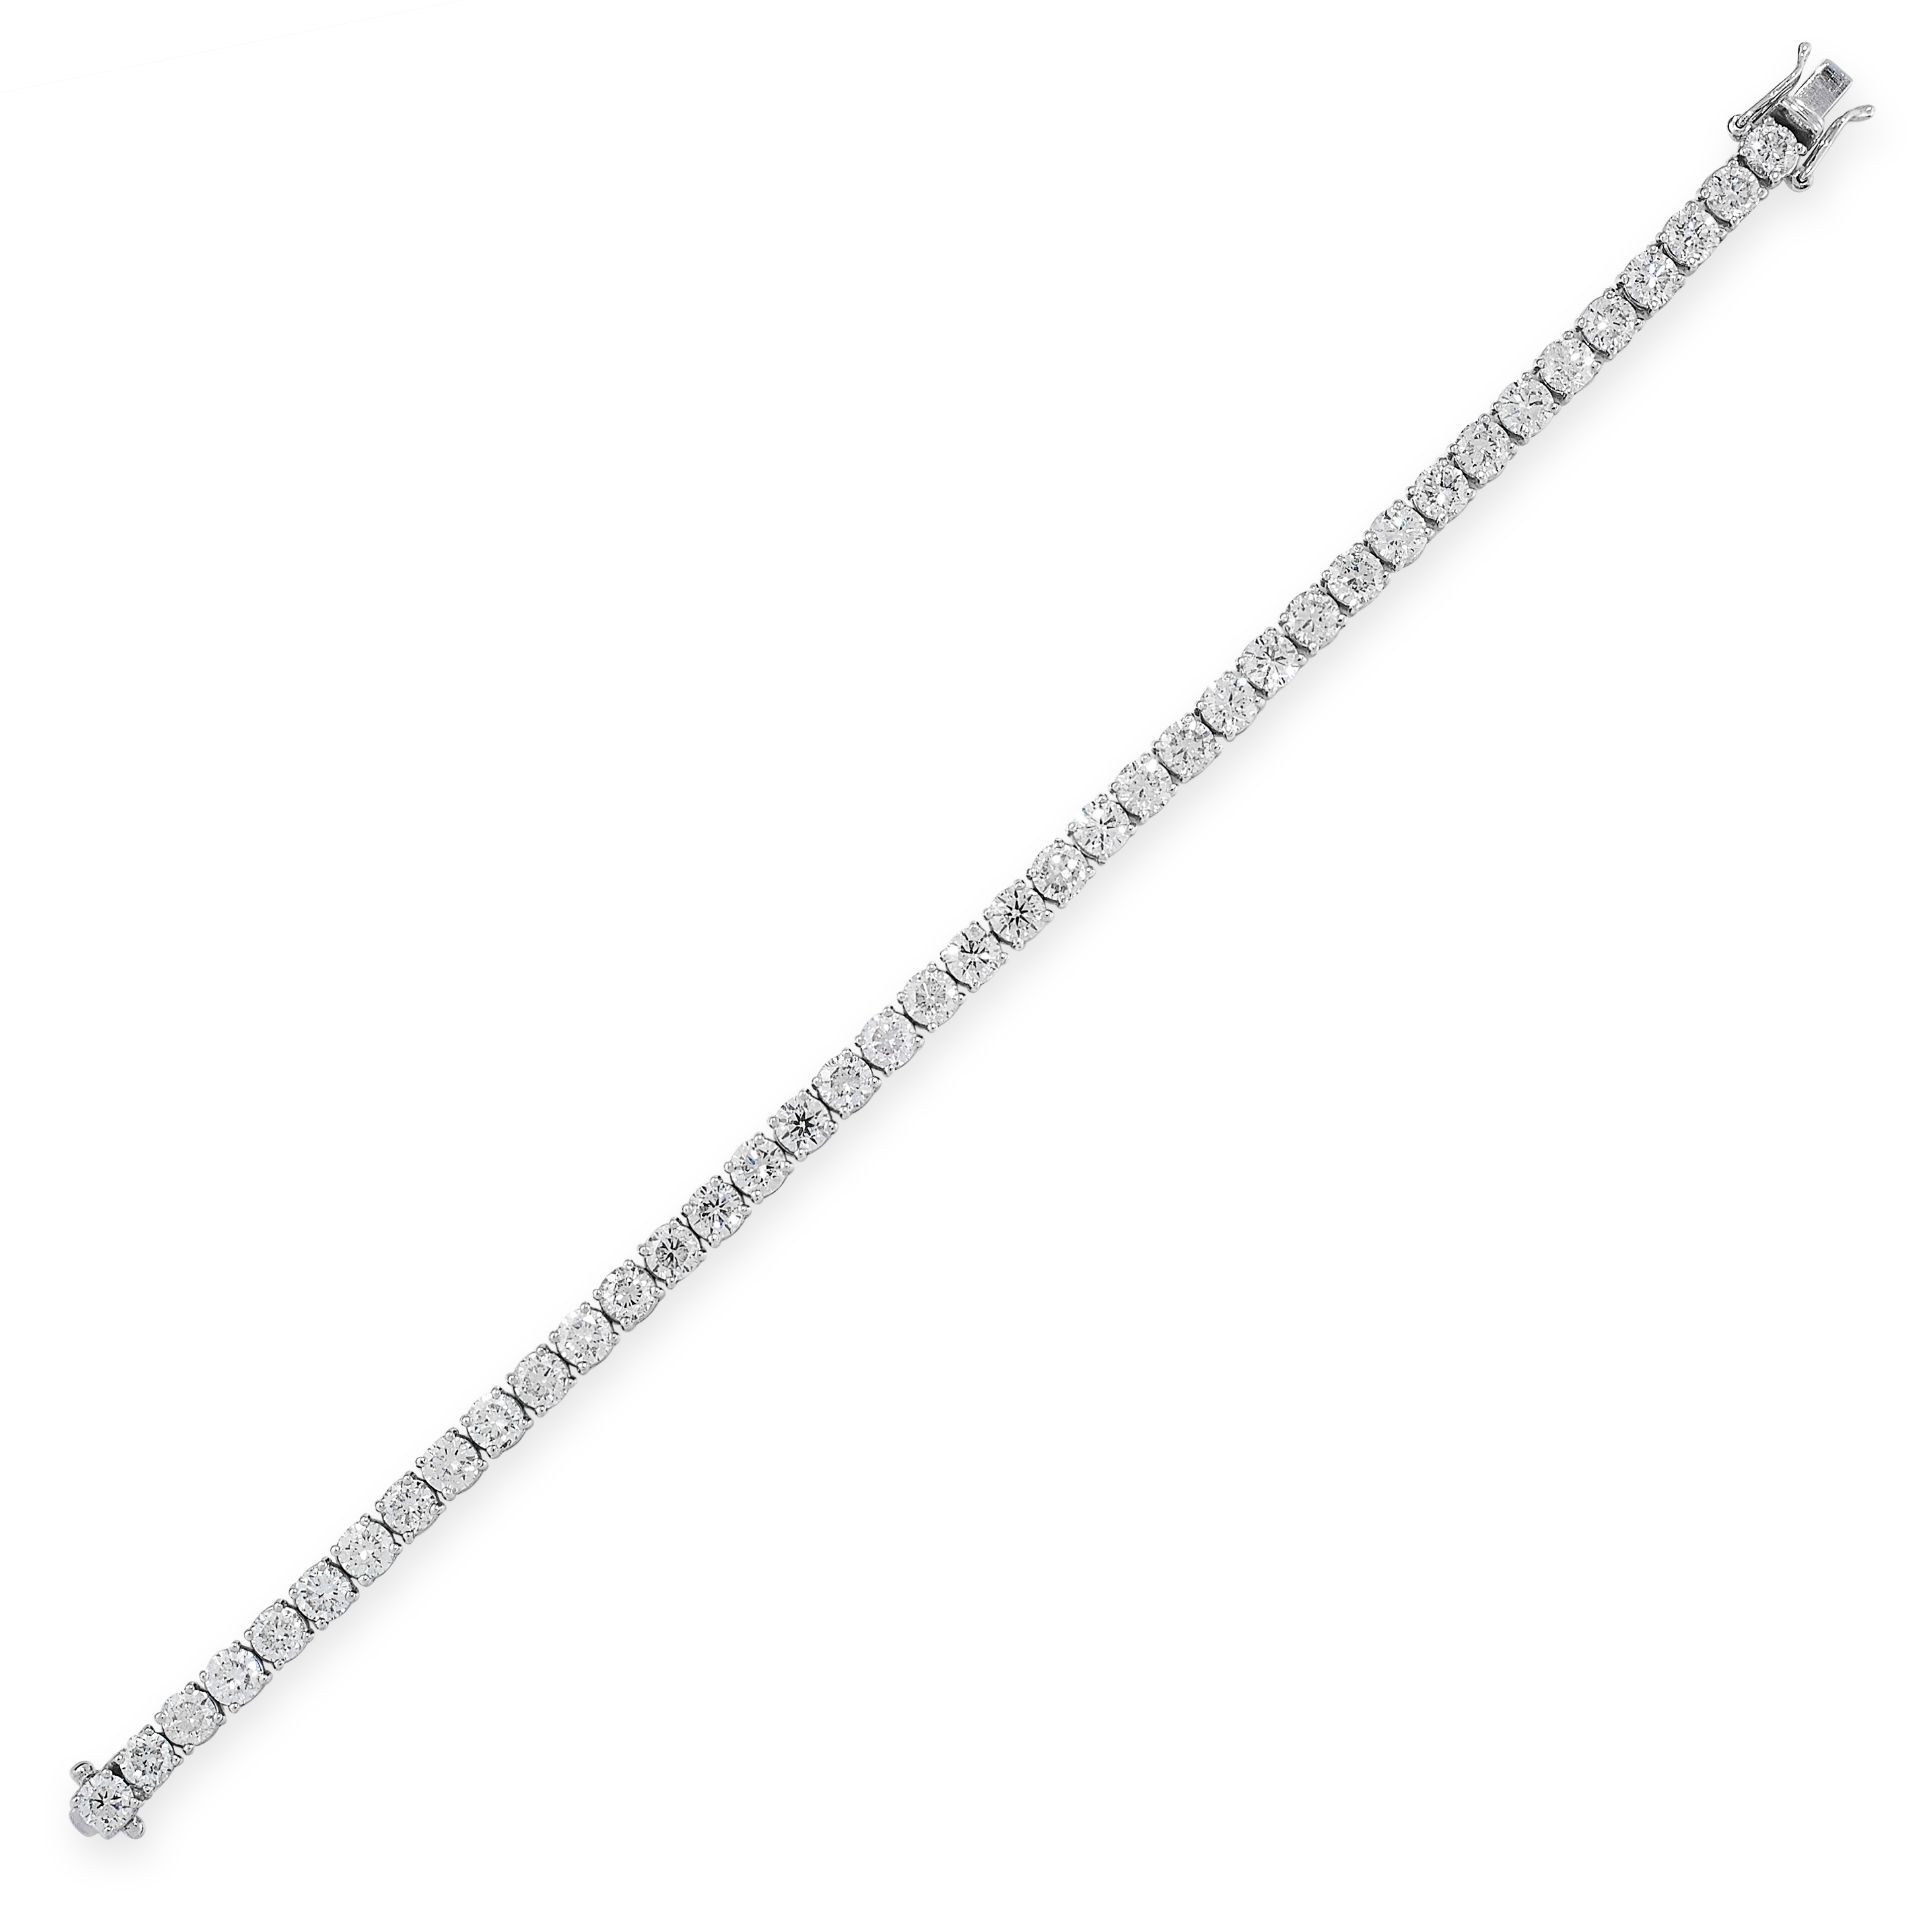 A 12.15 CARAT DIAMOND LINE BRACELET in 18ct white gold, comprising a single row of forty round cut